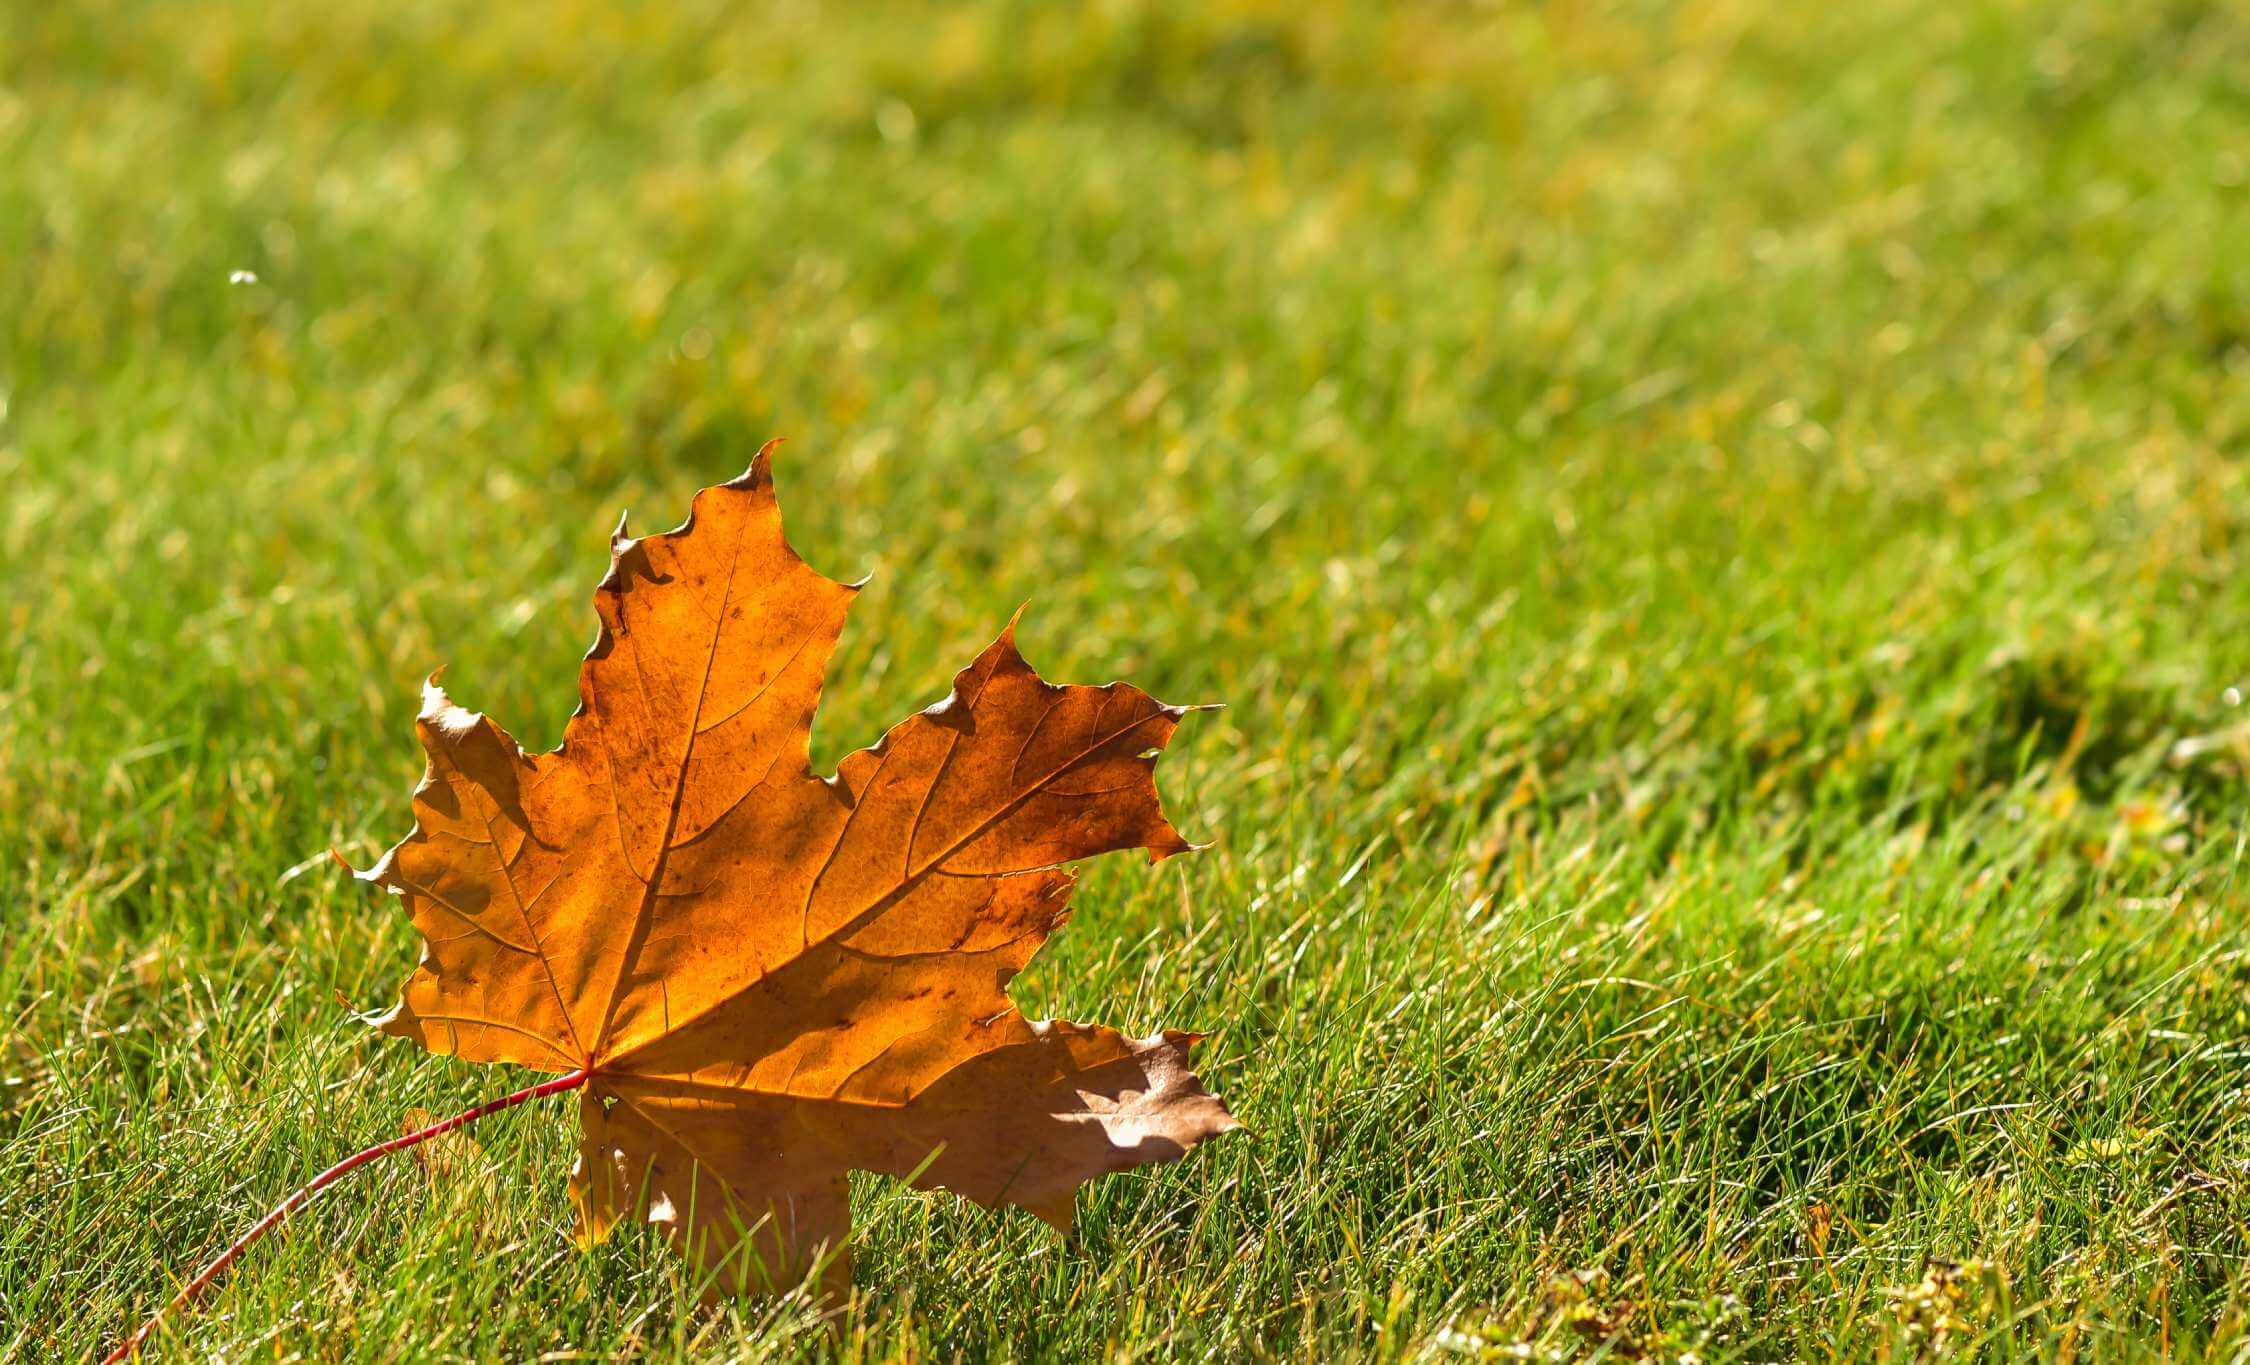 Maple leaf on green lawn in autumn sunny day, blurred background